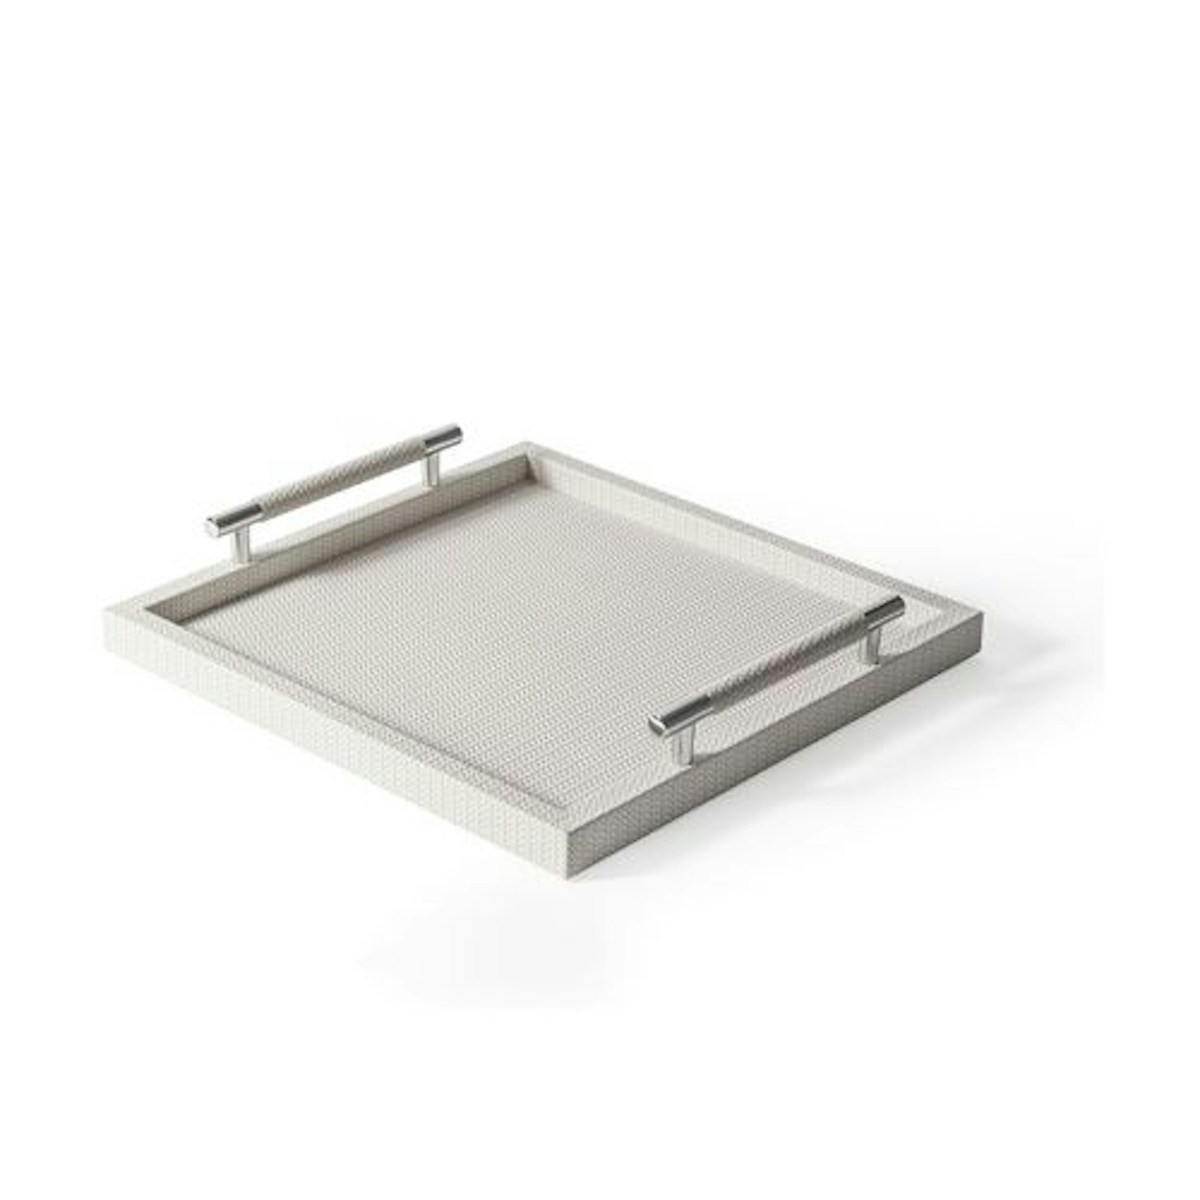 Square Cream Firenze Tray - 21 Best Decorative Trays To Buy For Your Tabletop - LuxDeco.com